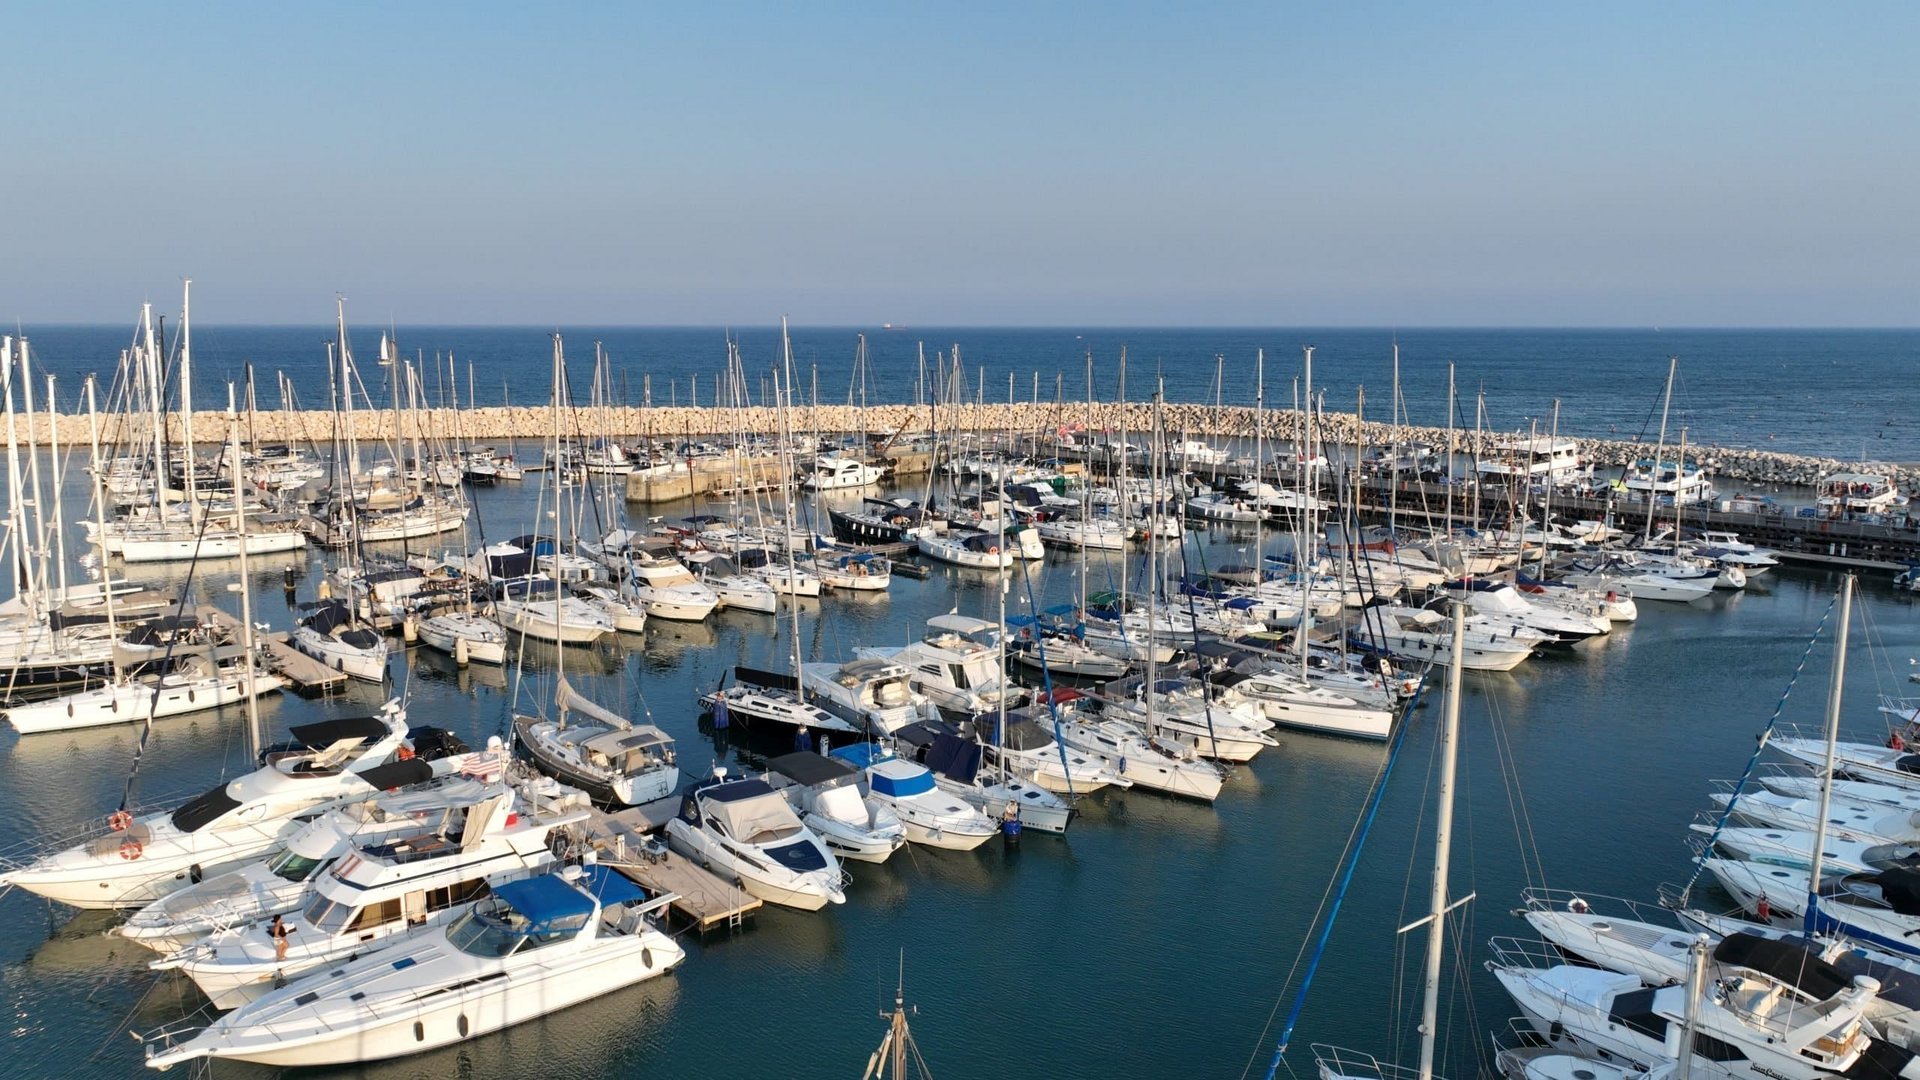 Larnaca port scrambles for future day after contract terminated (updated)